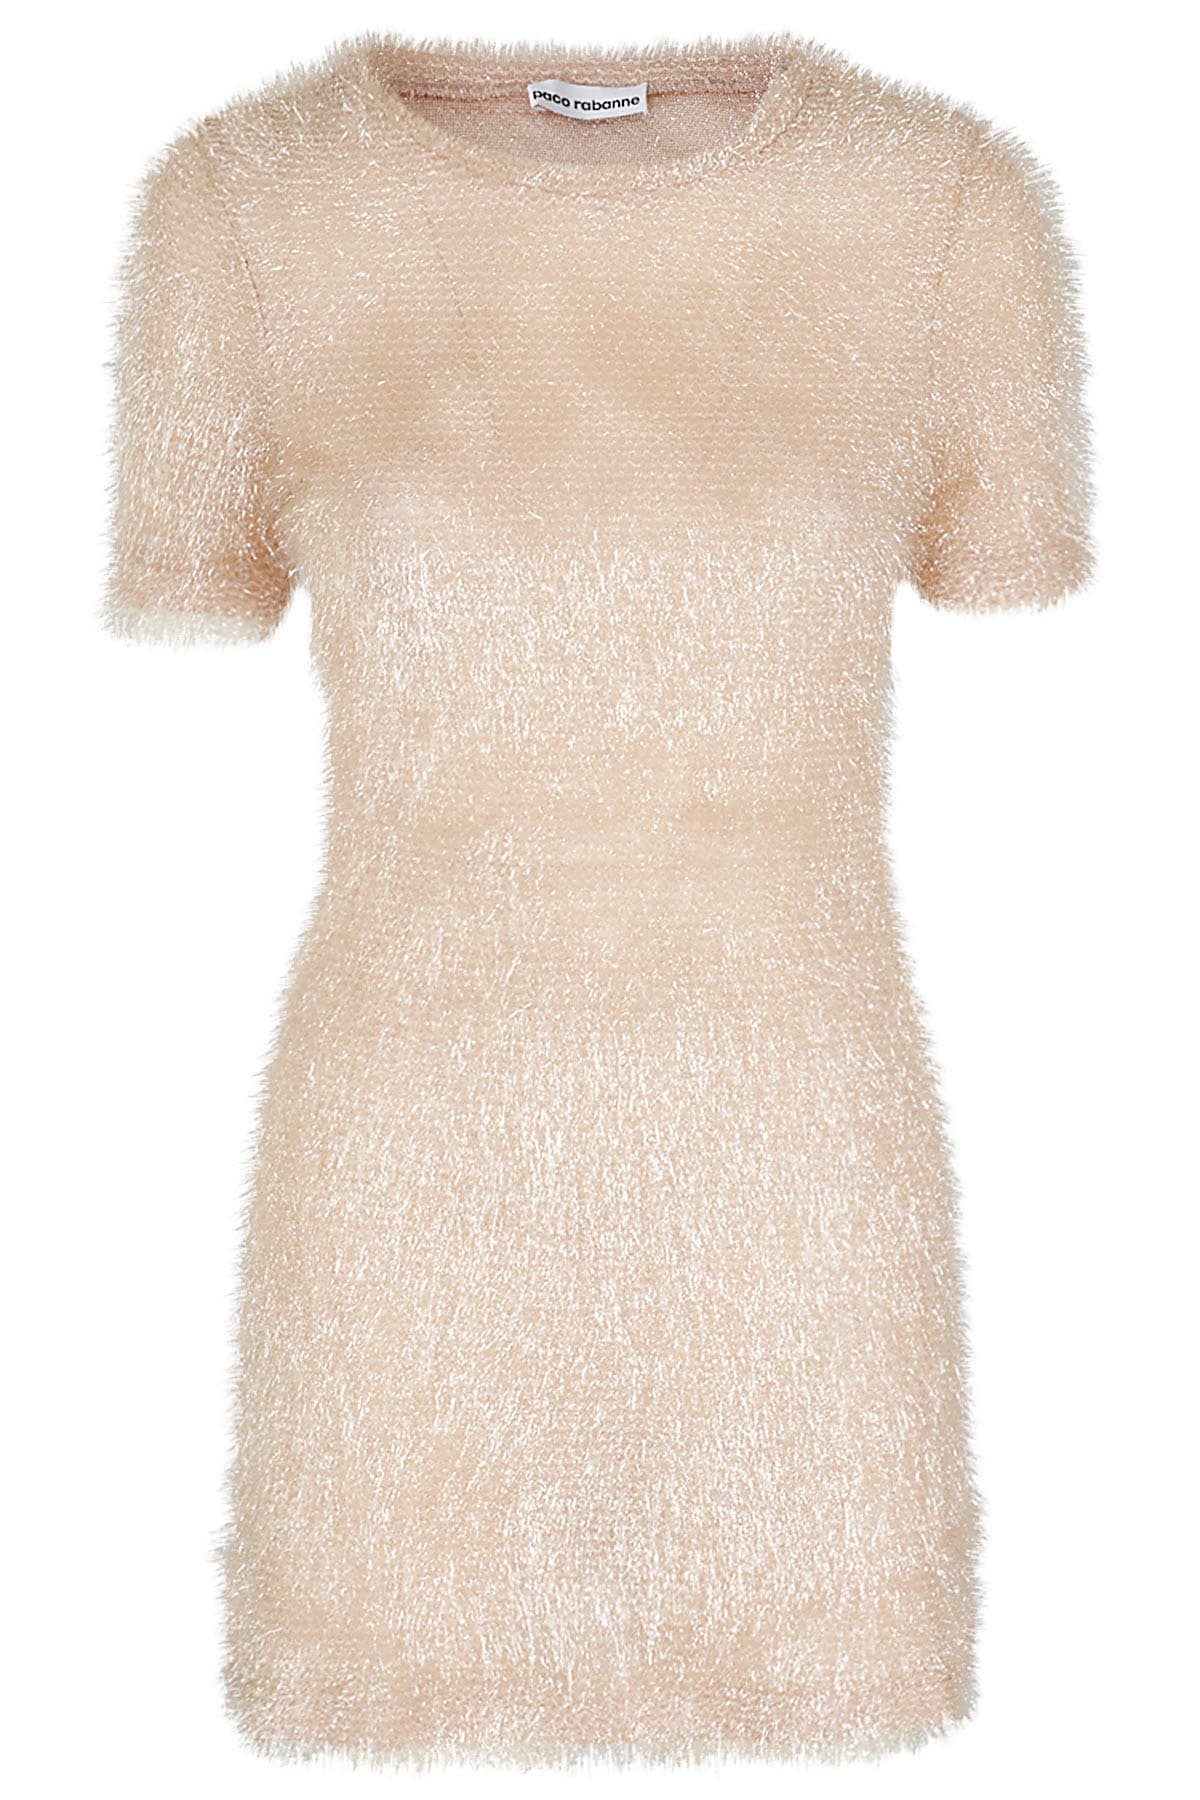 Paco Rabanne Robe In Light Pink